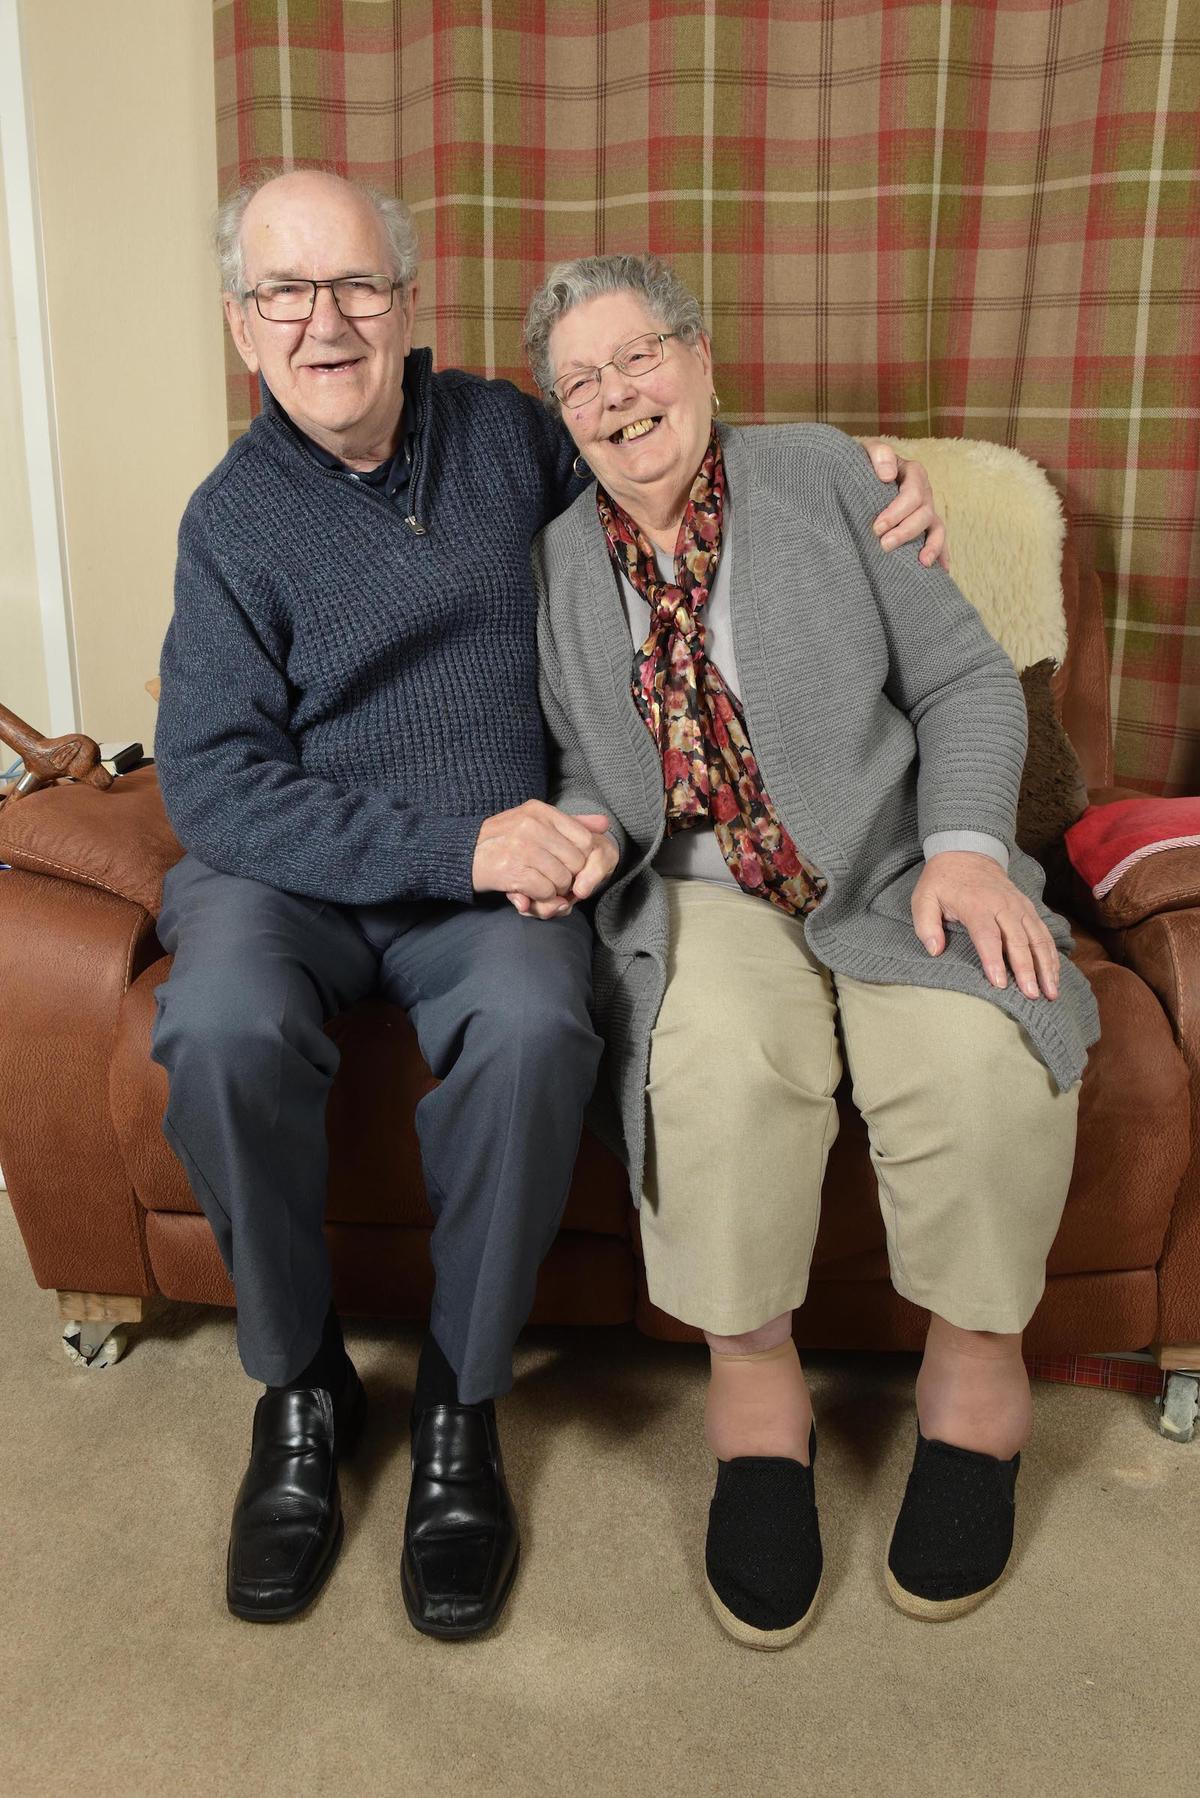 Wilfred, 94, and Iris, 89, have been together for 70 years. (Caters News)